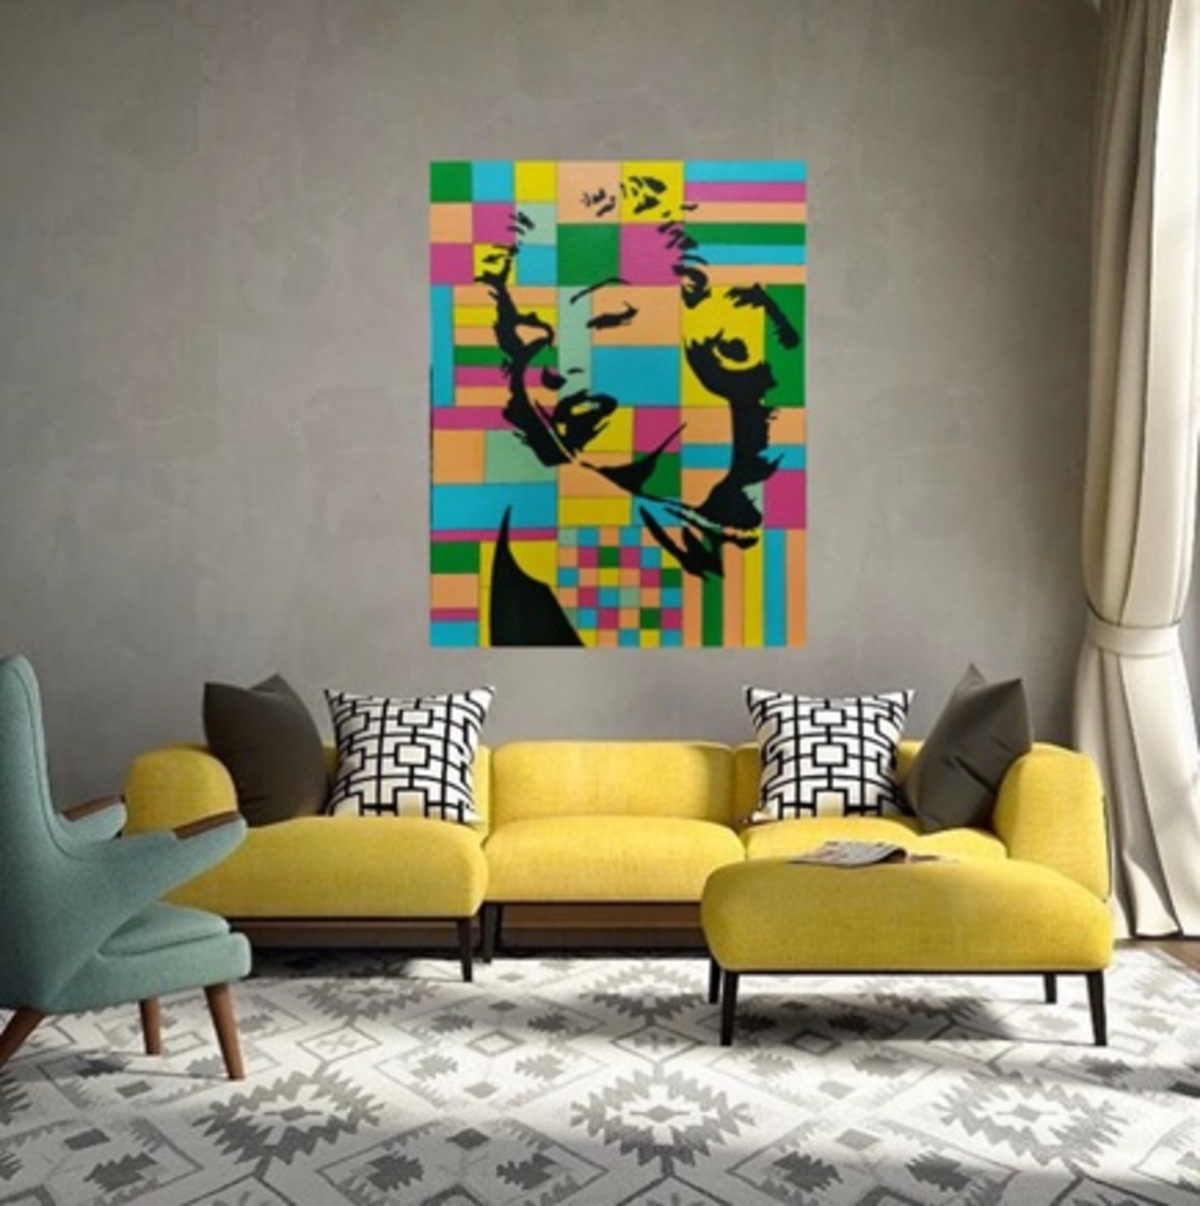 Pop art interior design: A vibrant fusion of colour, iconography, and everyday art